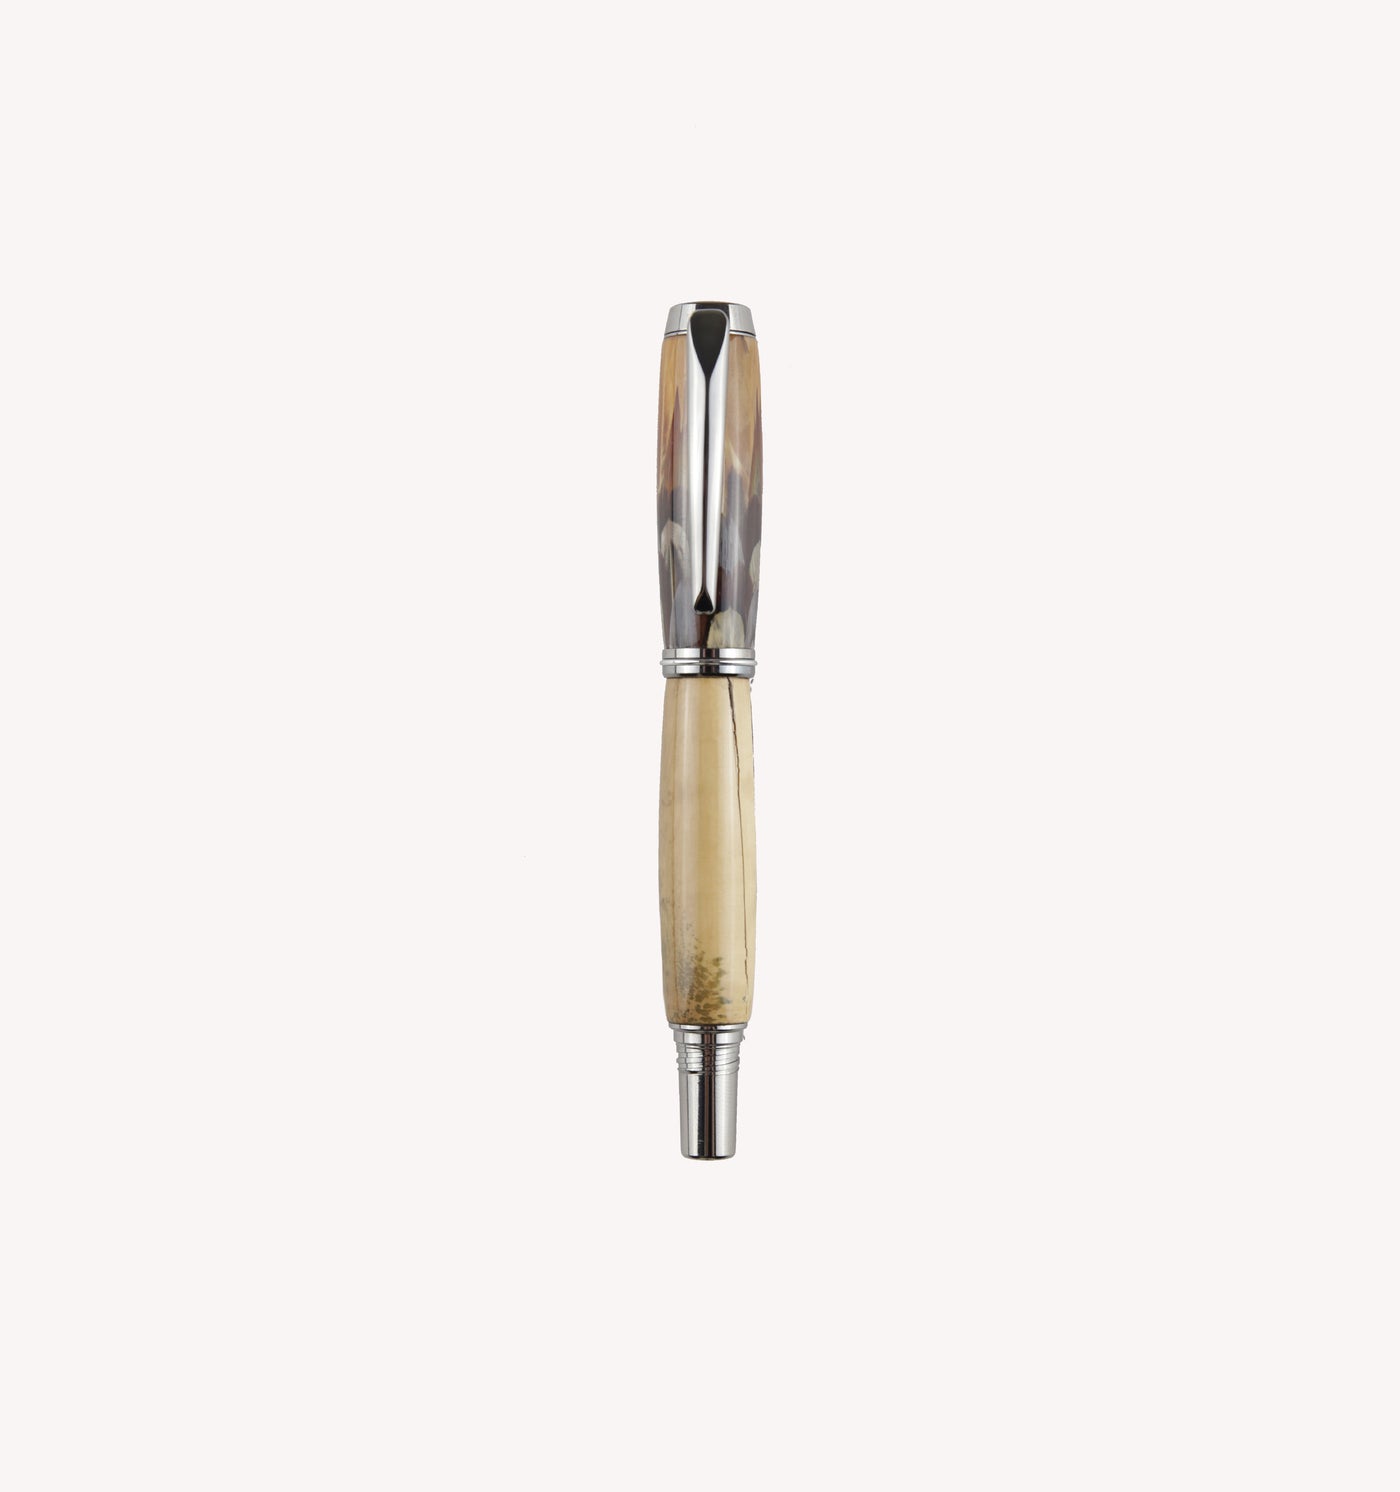 David Feather and Woolly Mammoth Tusk Pen